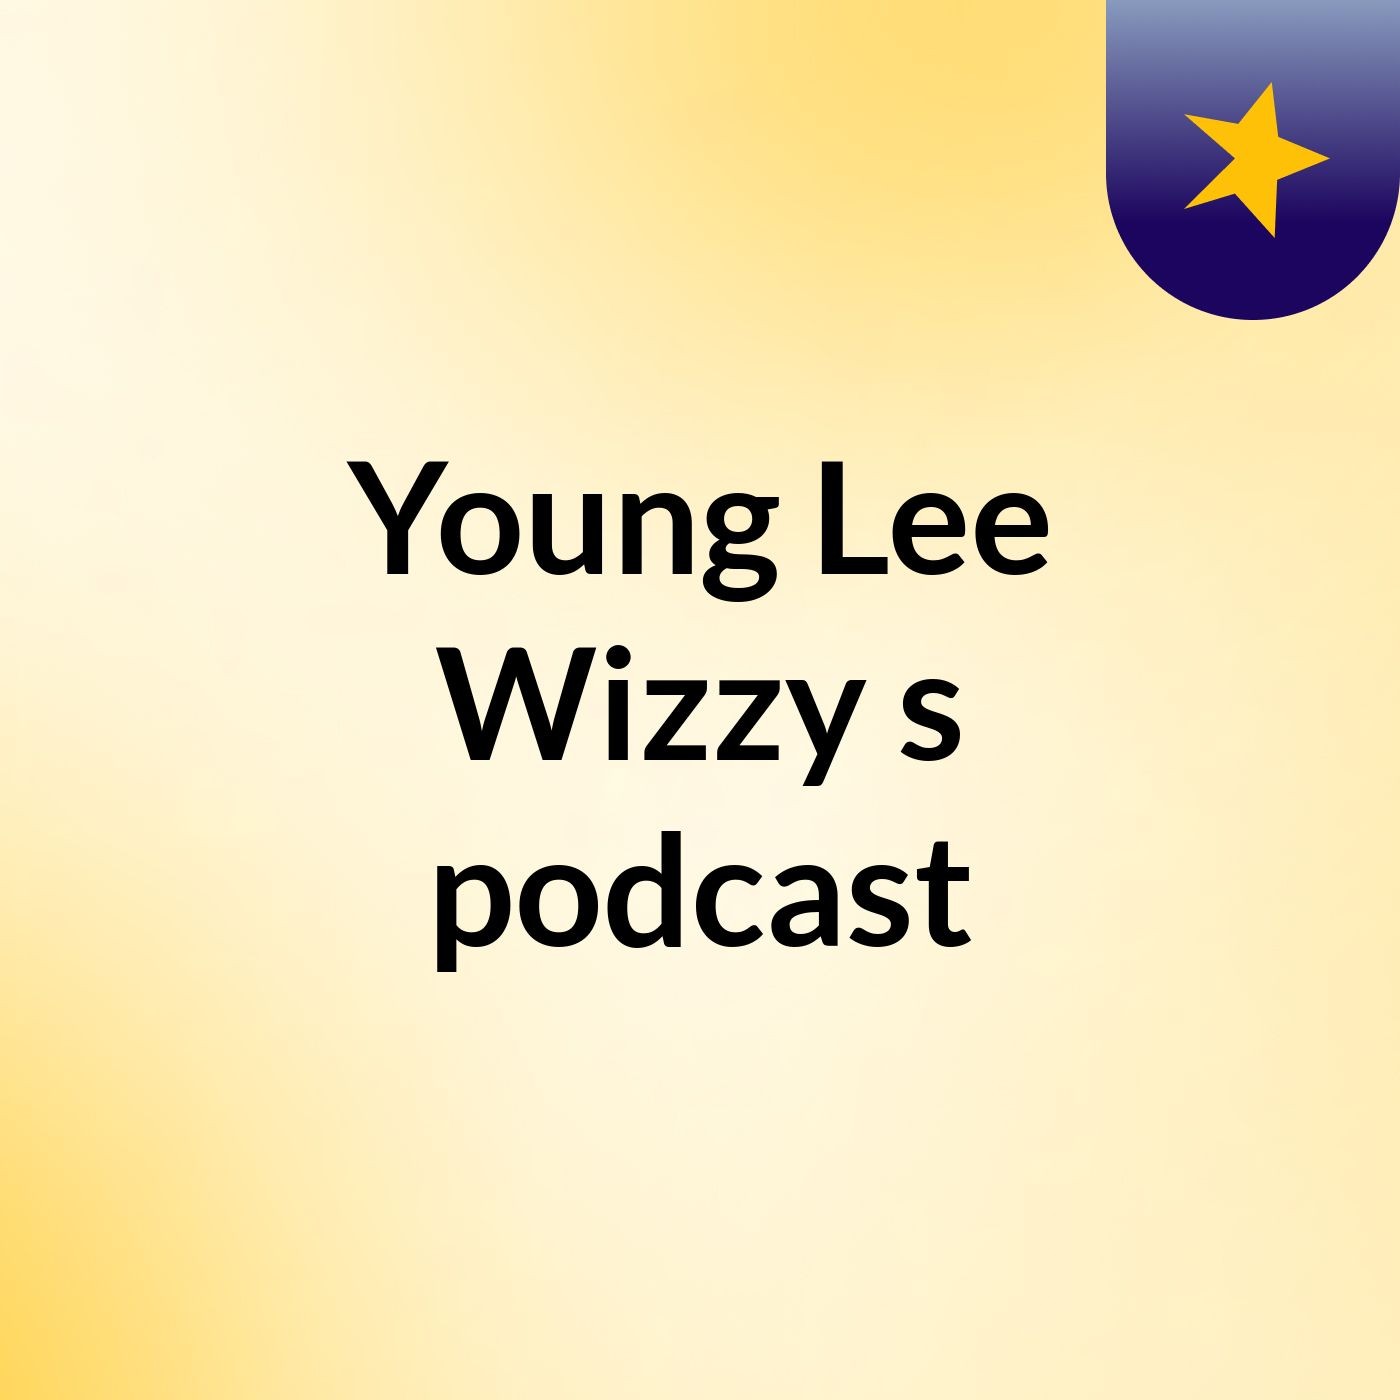 Young Lee Wizzy's podcast